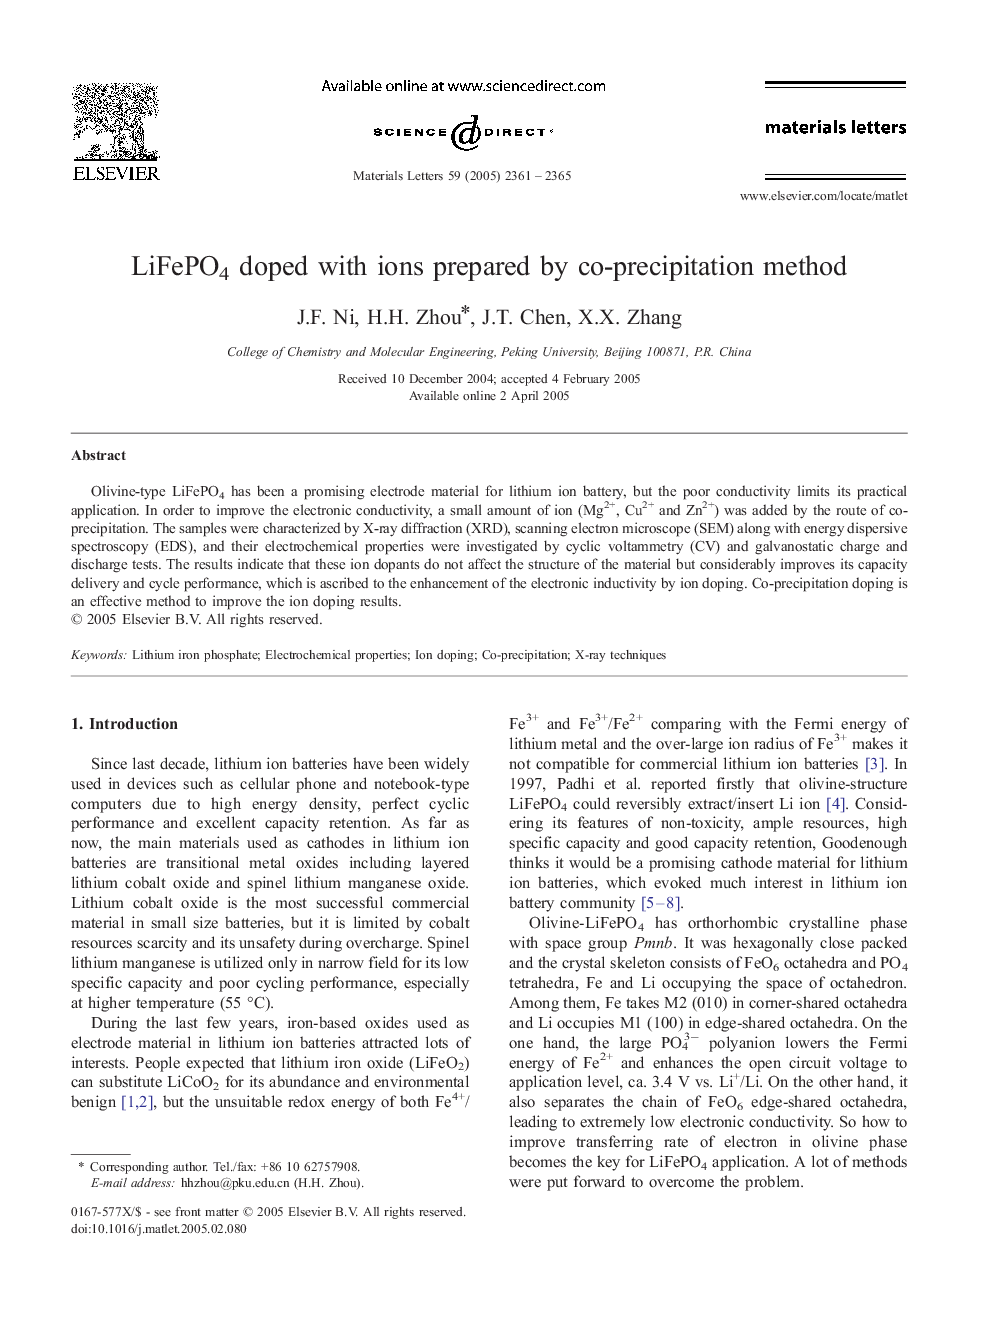 LiFePO4 doped with ions prepared by co-precipitation method